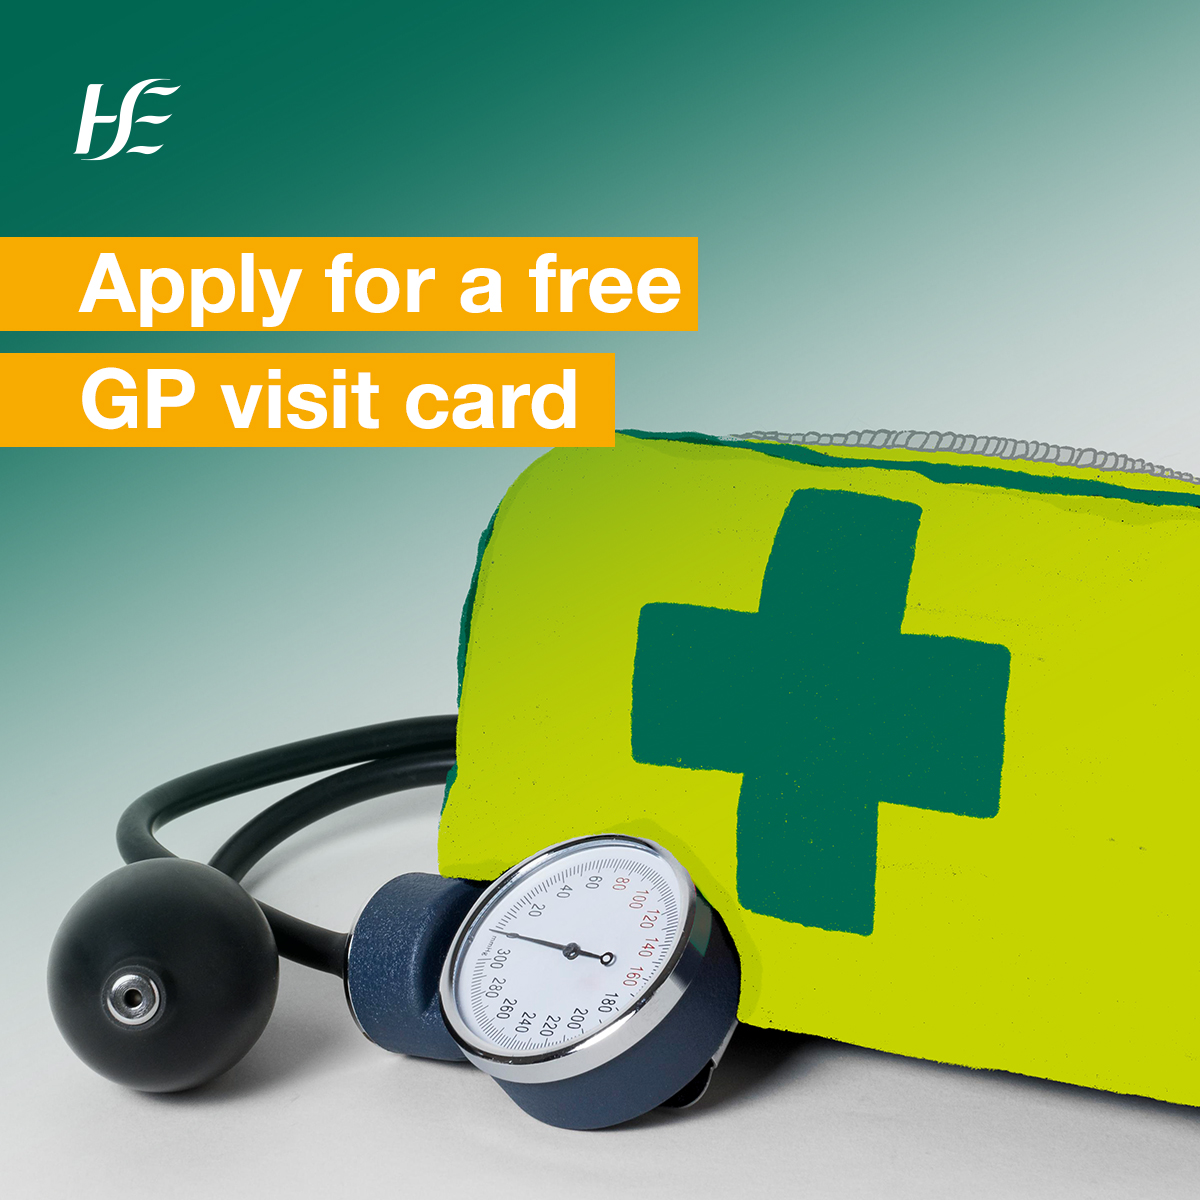 The income threshold to be eligible for a GP visit card has been increased, so more people than ever may qualify for free GP visits. Are you eligible? Apply online to find out: bit.ly/4al5soa